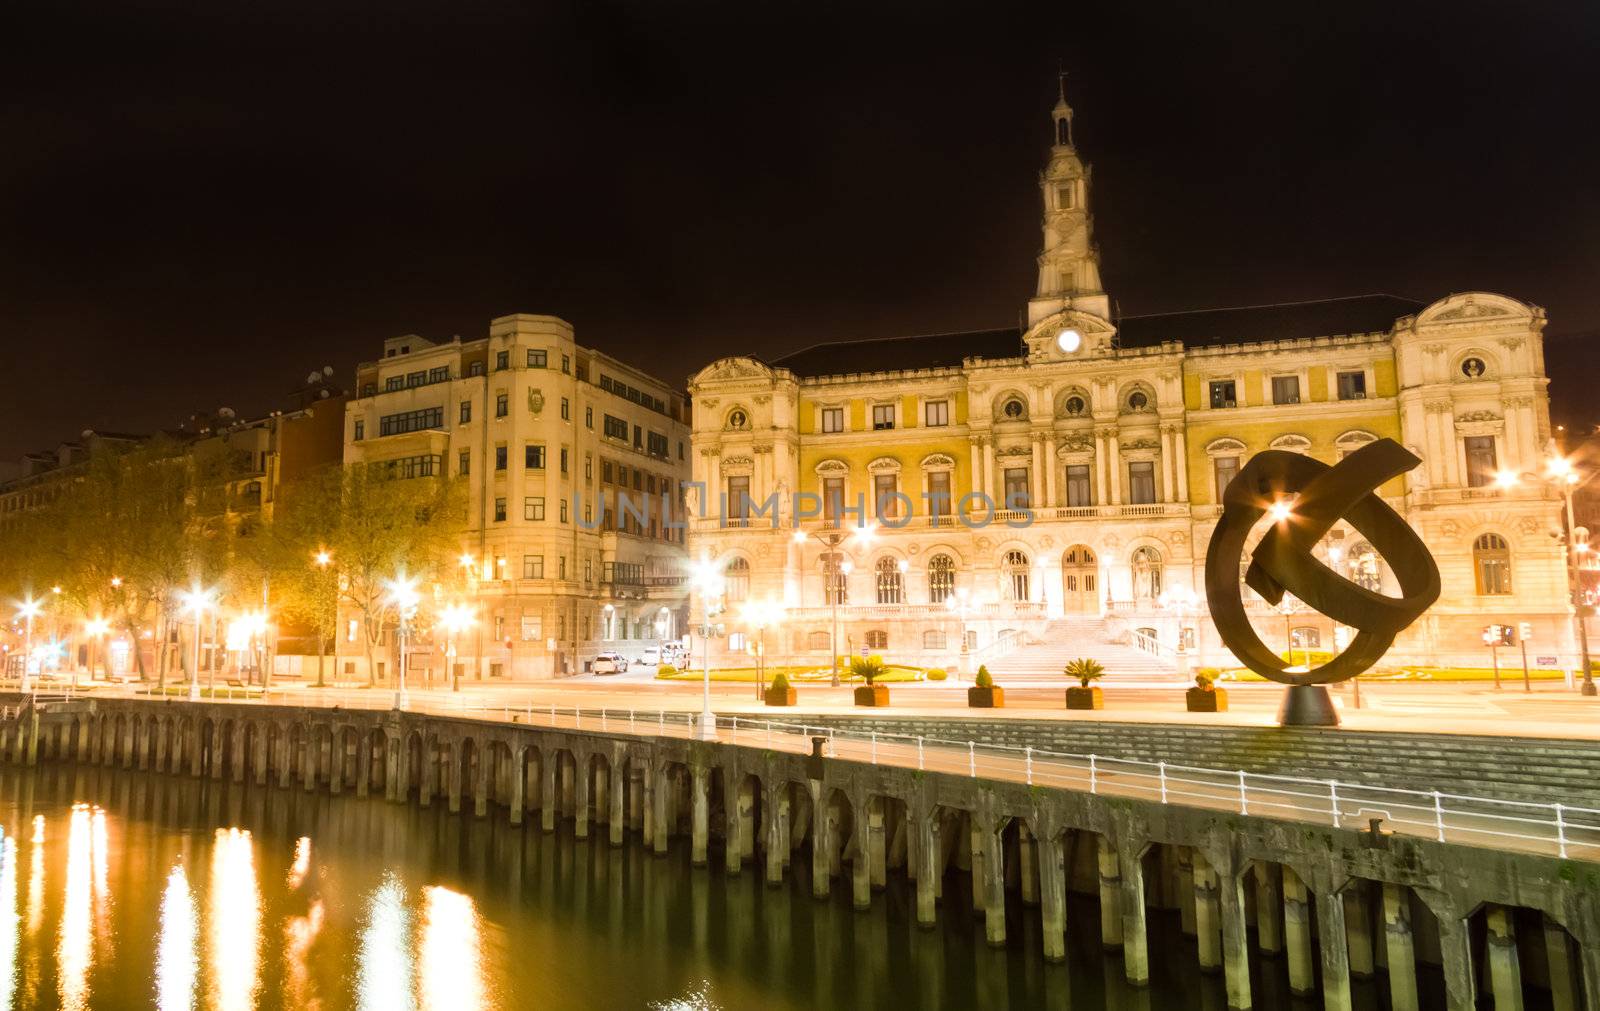 Bilbao city hall at night by doble.d